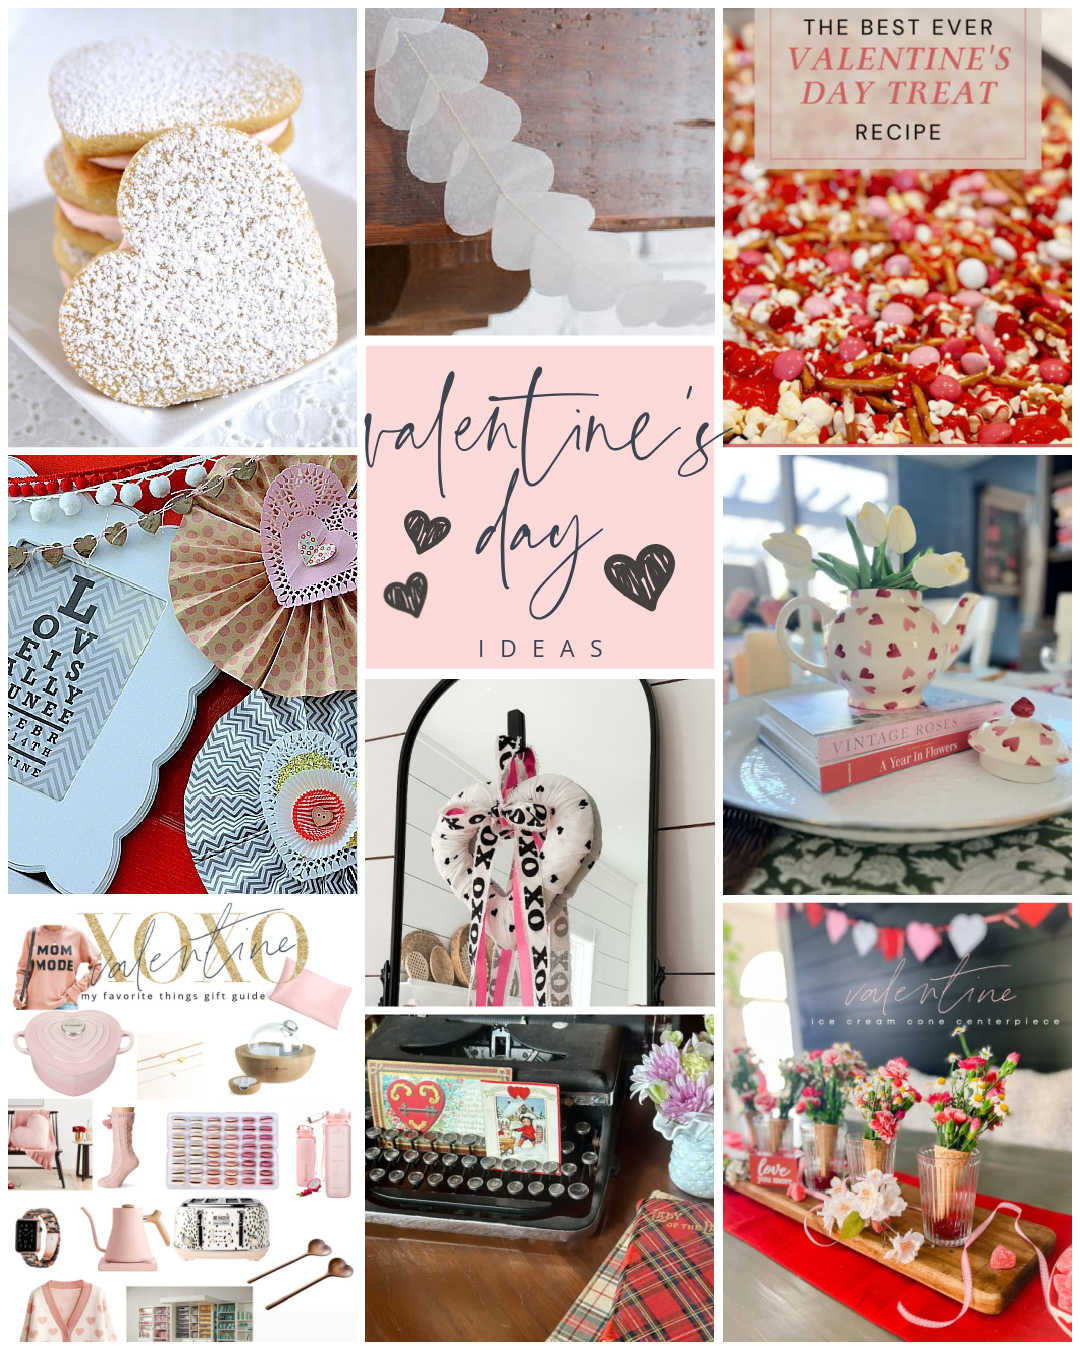 Valentine's Day Decorating Ideas! Brighten up your winter decor with these easy and inexpensive Valentine's Day decorating ideas!